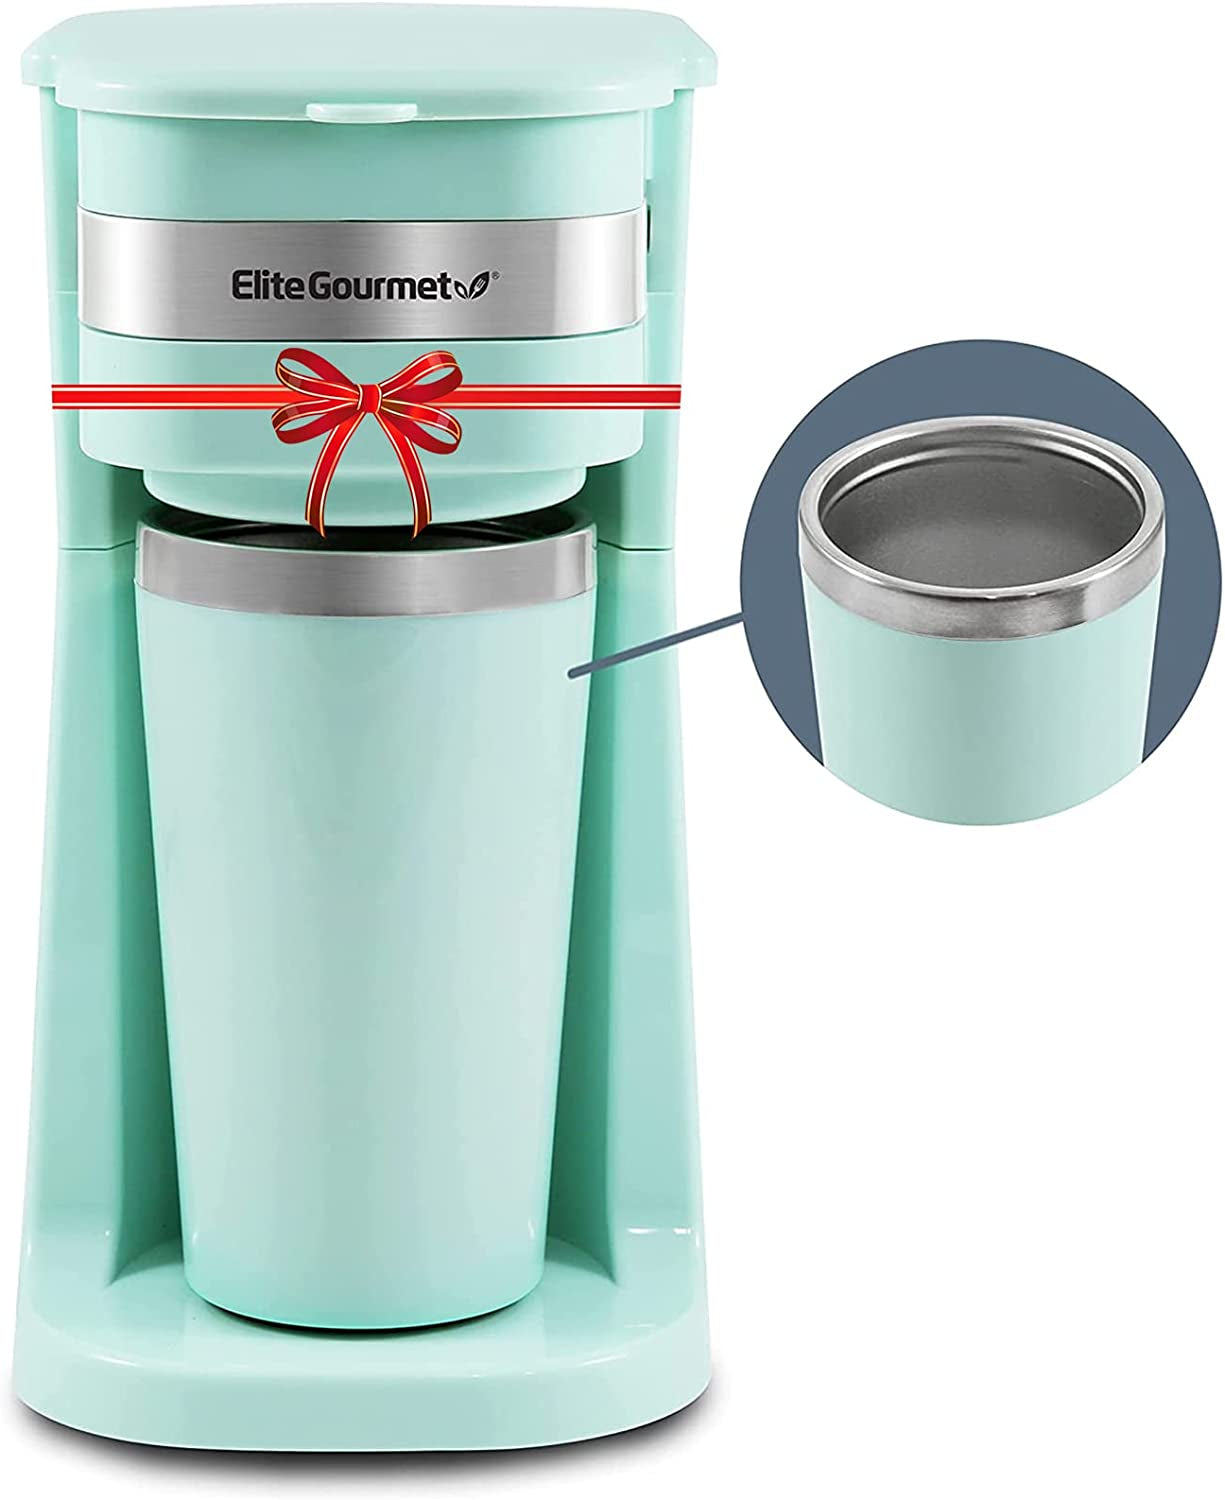 Personal Single-Serve Compact Coffee Maker Includes 14oz. Stainless Steel Interior Thermal Travel Mug